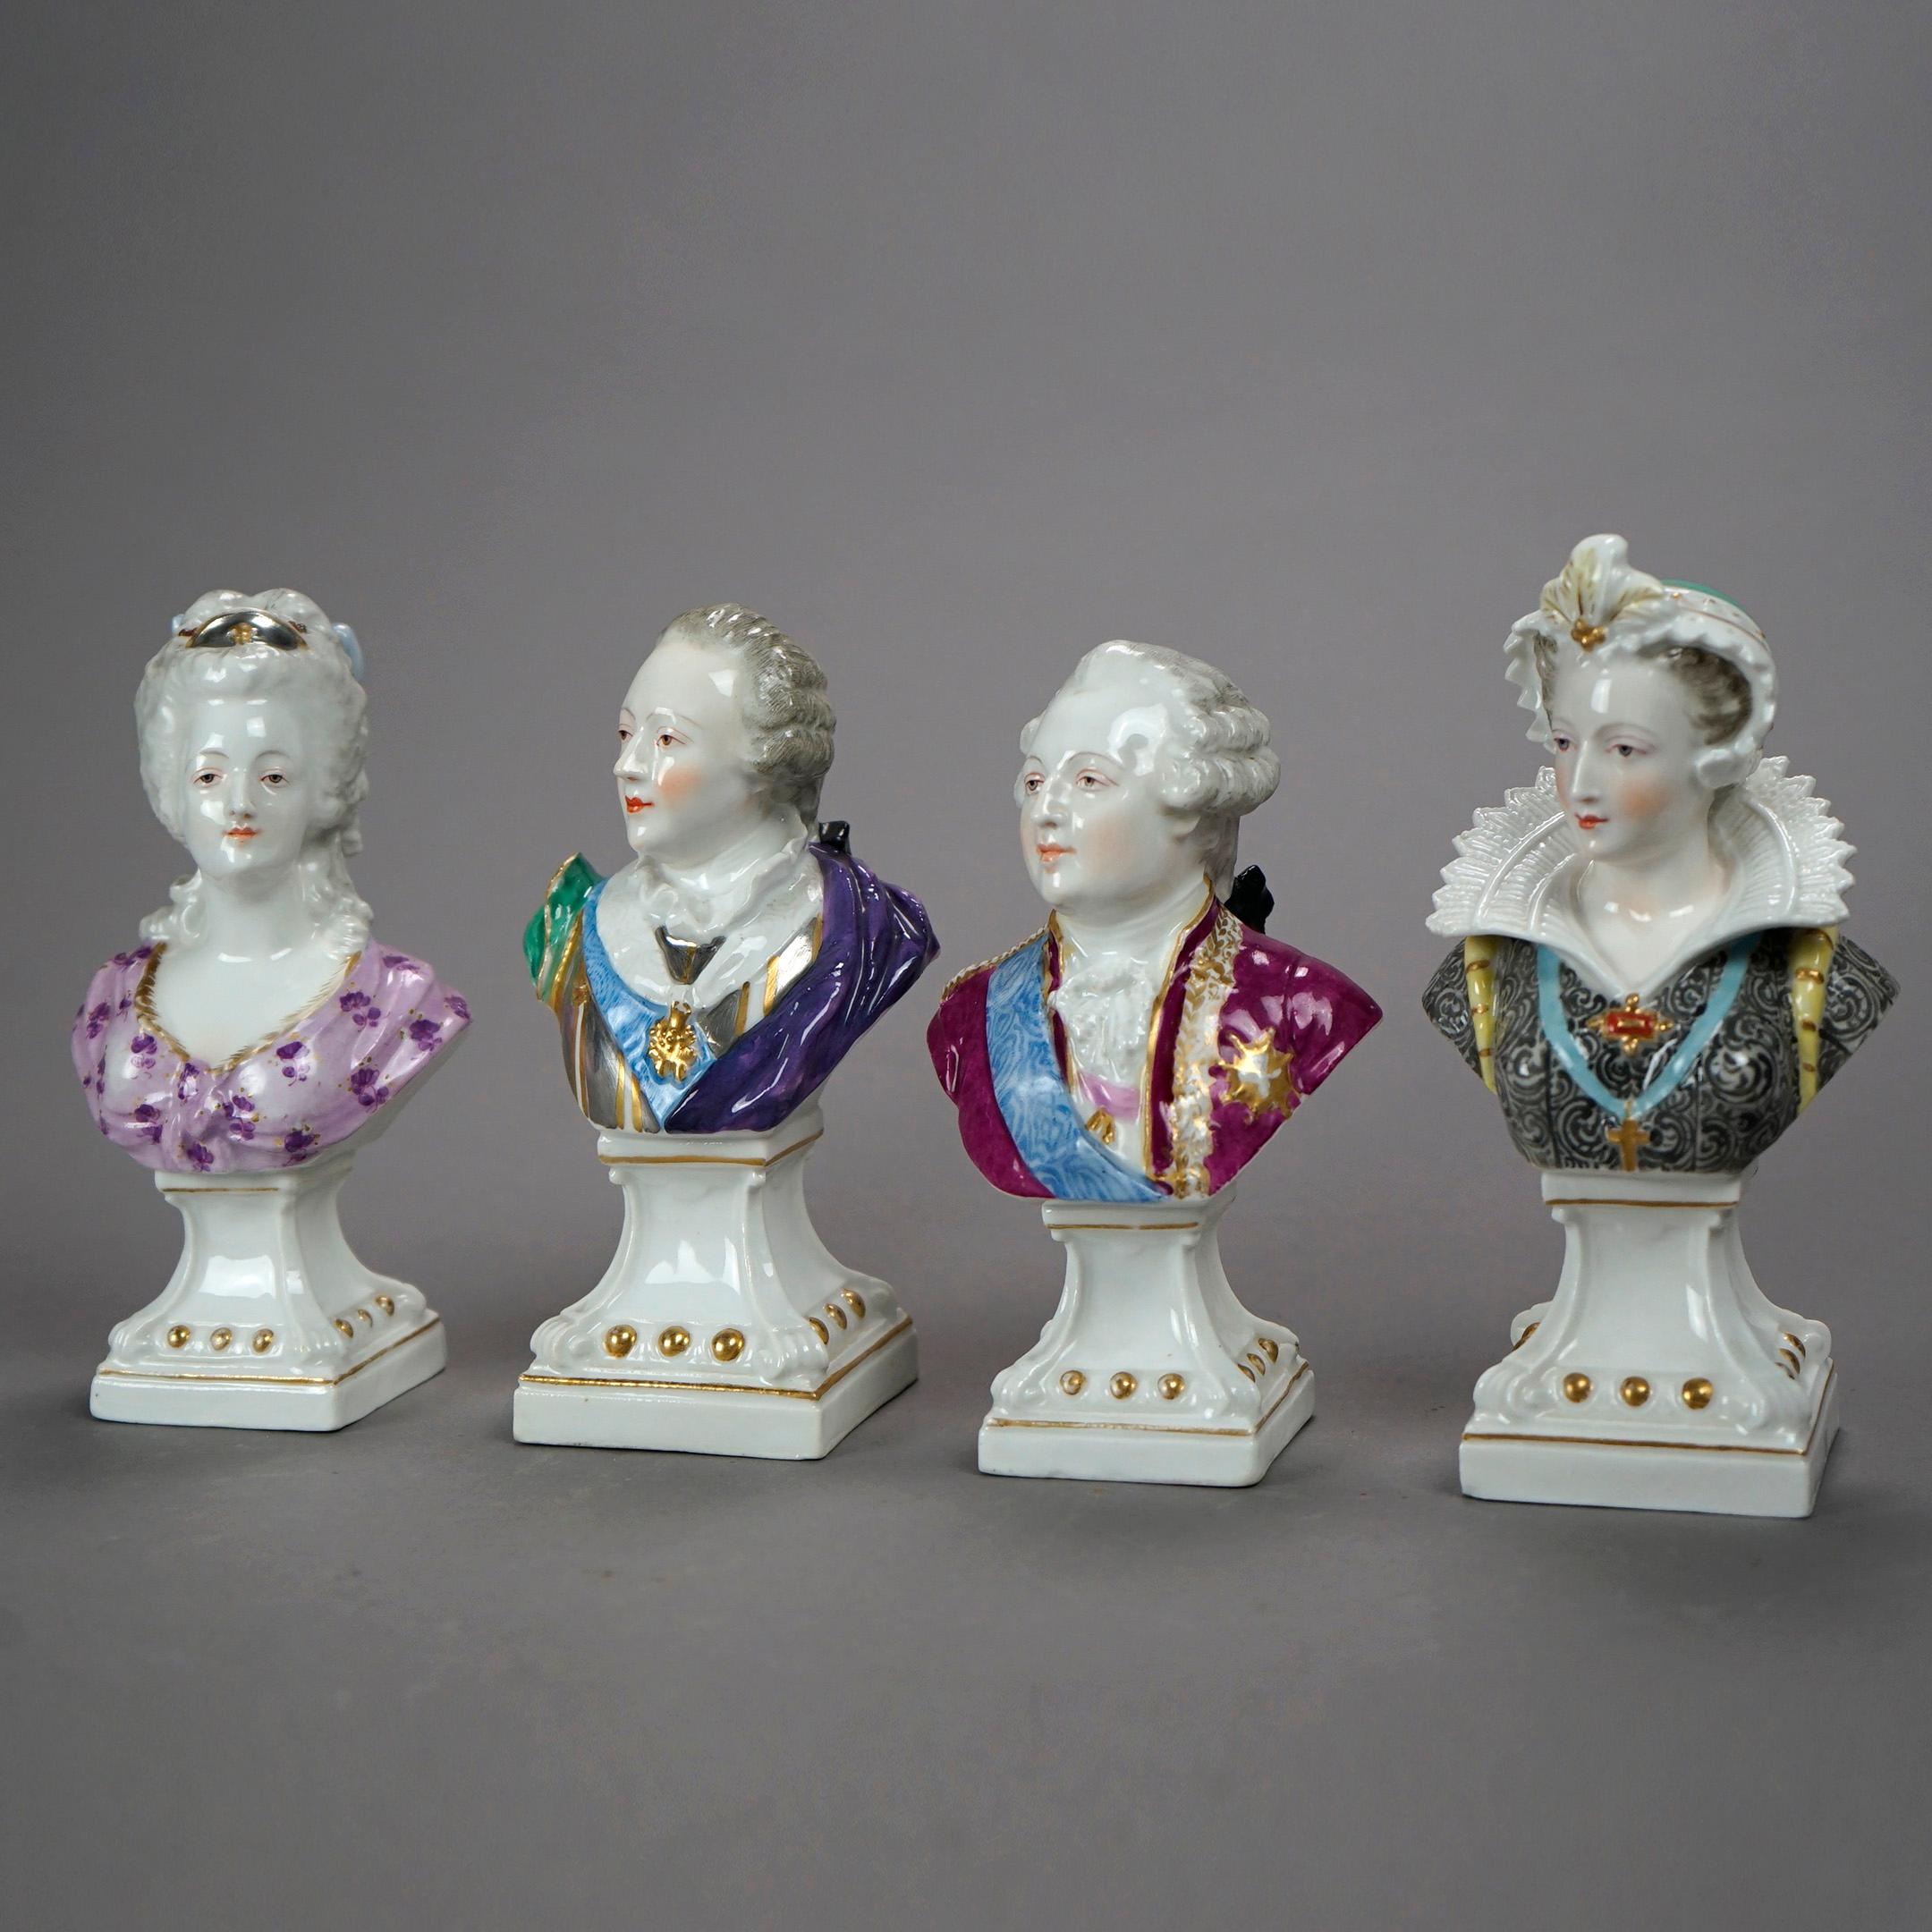 Antique French Edme Samson porcelain busts offer hand painted ad gilt Louis XIV Court figures to include Marie Antoinette,  Louis V, Louis VXI and Maria Stuart, maker mark on bases as photographed, 19th century

Measures - 6''H x 3''W x 2.5''D